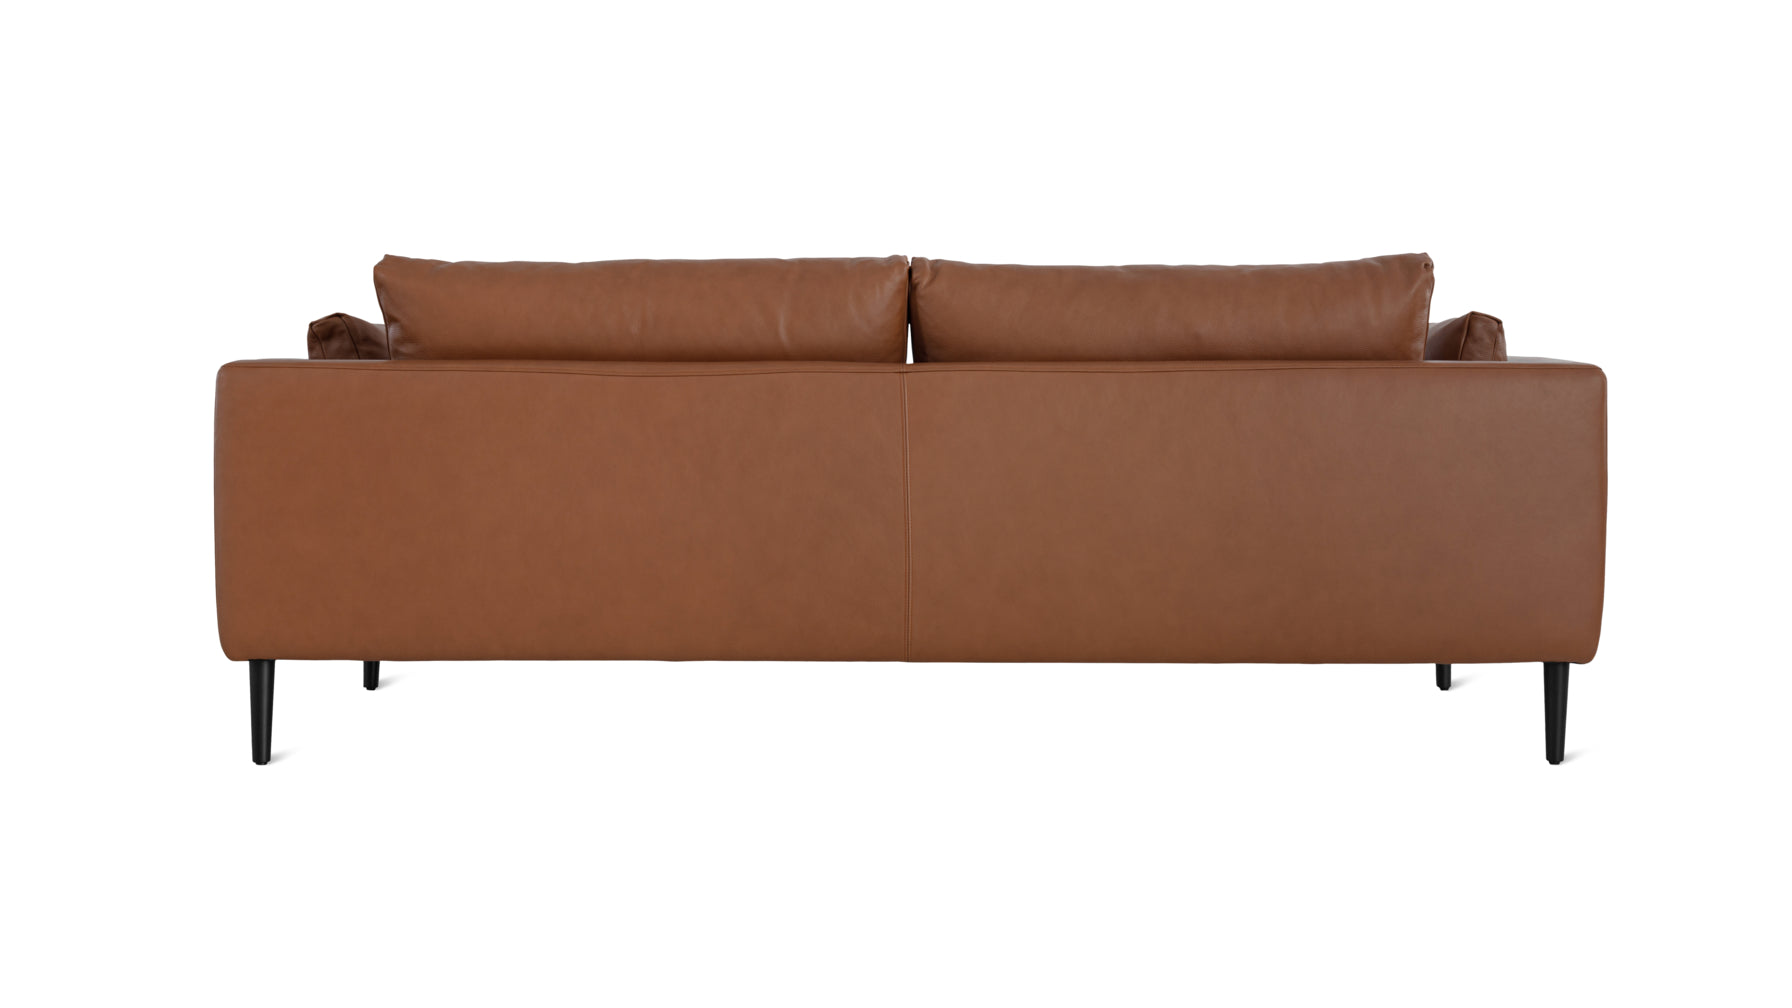 Stay A While Sofa, 2.5 Seater, Cigar - Image 4